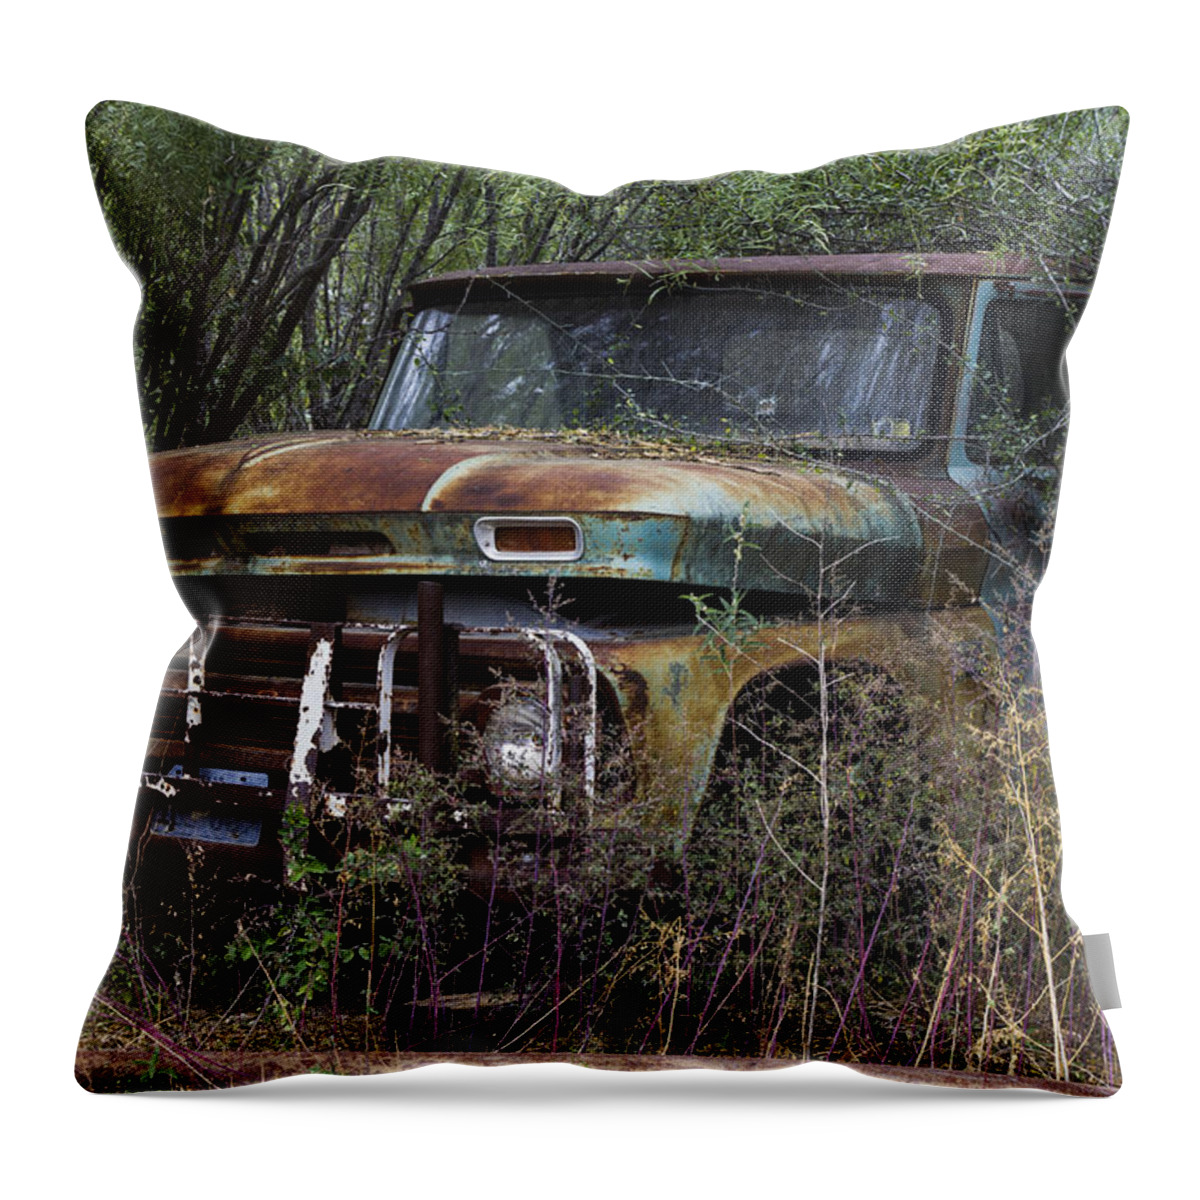 Texas Throw Pillow featuring the photograph Rust Bucket by Amber Kresge